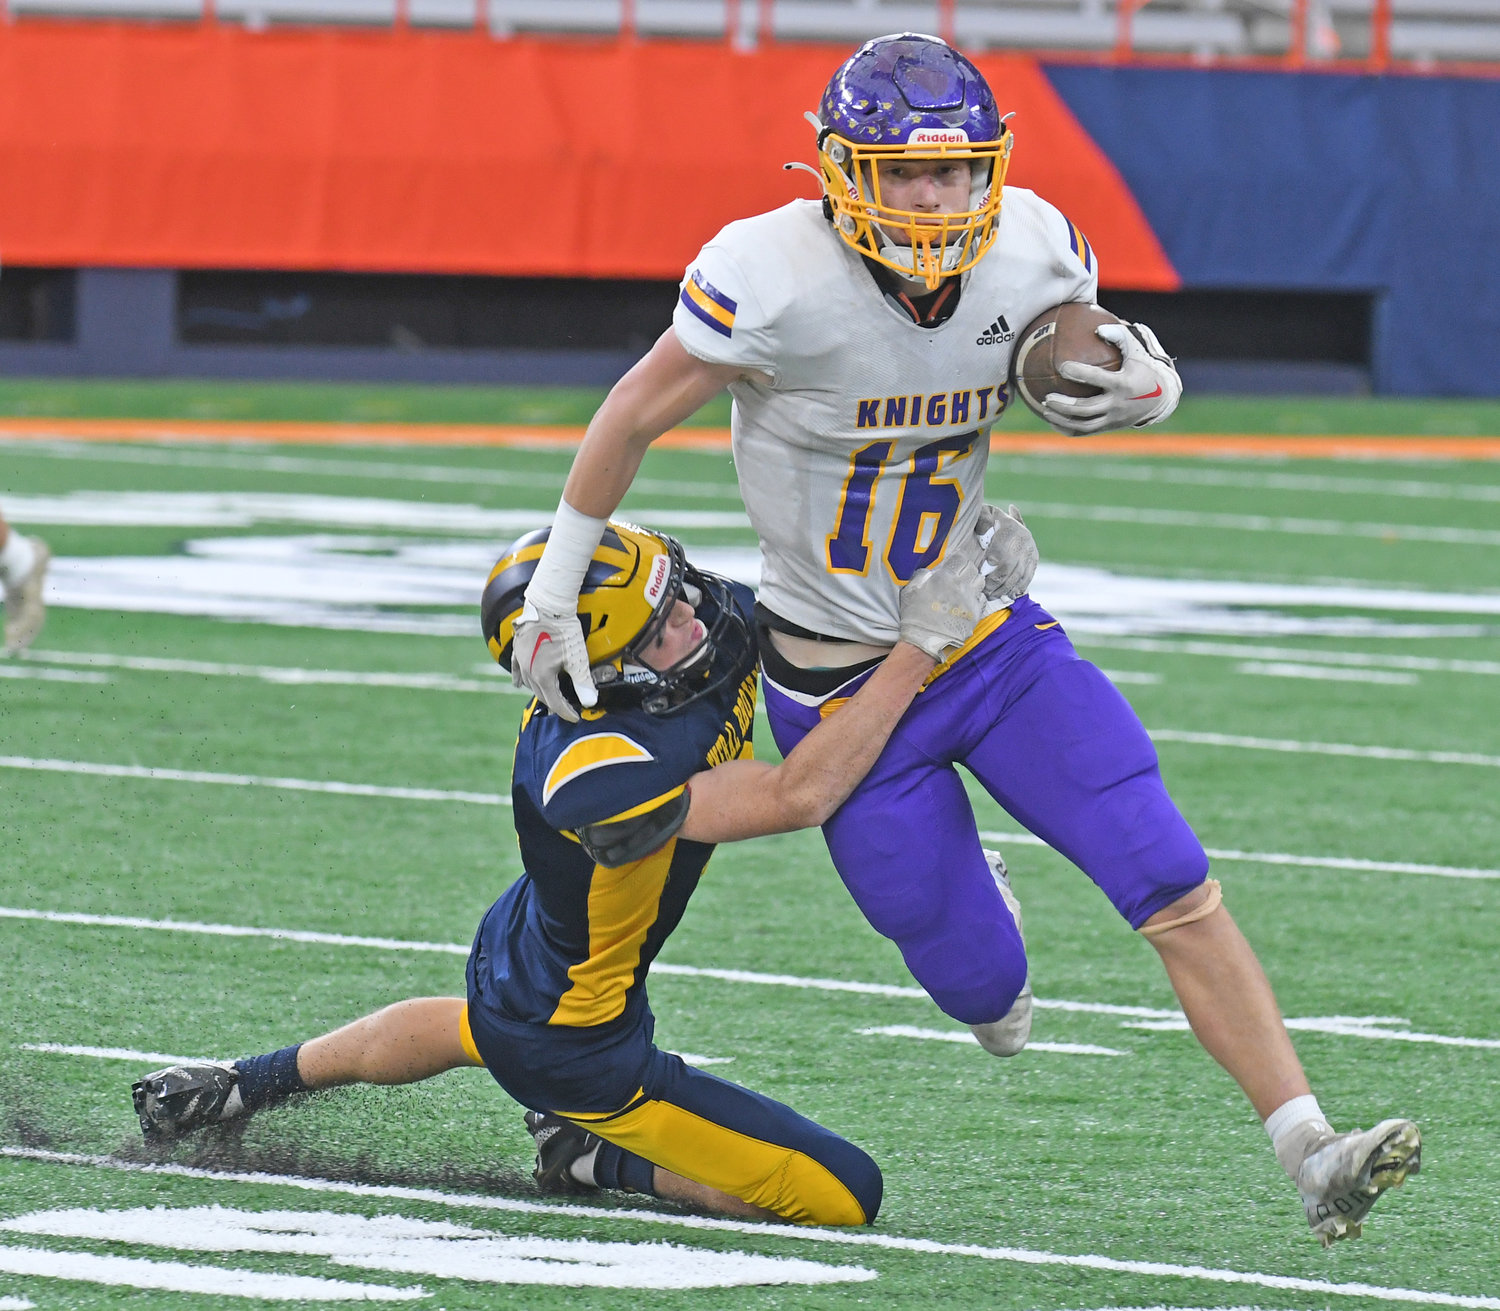 General Brown’s Ben Eichhorn hangs on to Holland Patent tight end Nicholas Deforrest in the first quarter Sunday afternoon at JMA Wireless Dome in Syracuse. General Brown won the Section III Class C title game 41-0.